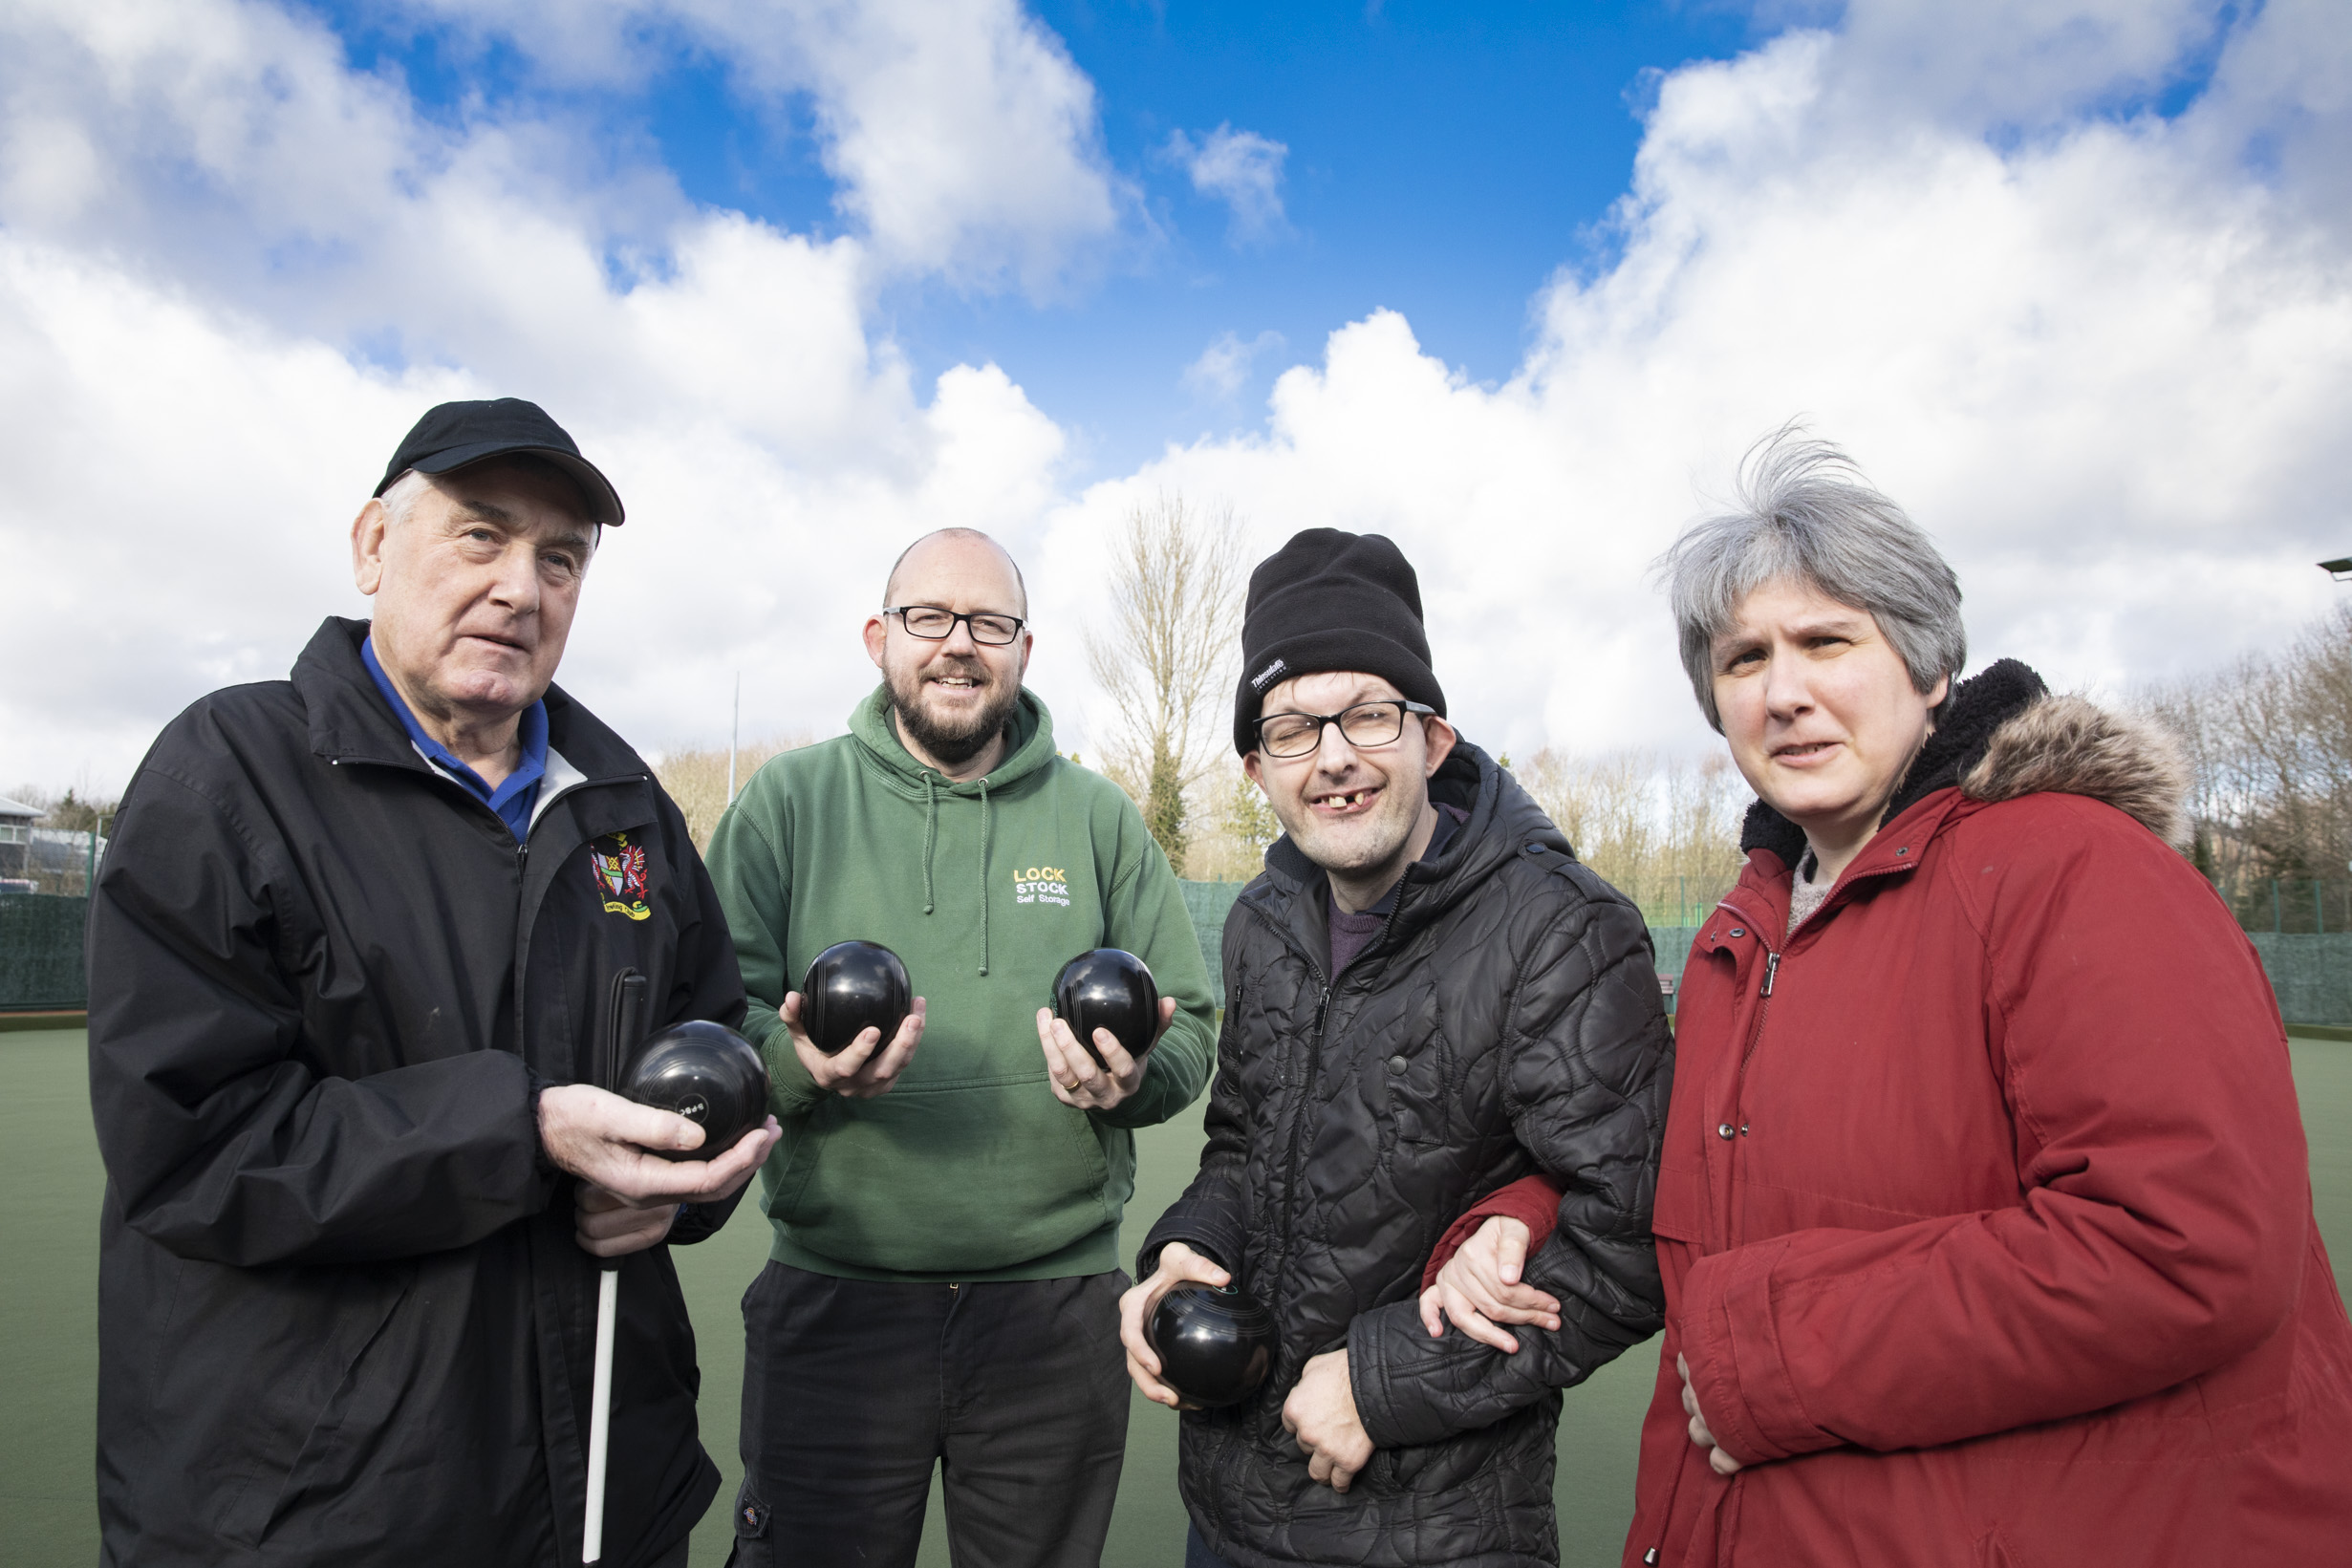 Storage giant helps blind bowlers beat disability on Bradley’s all-weather green